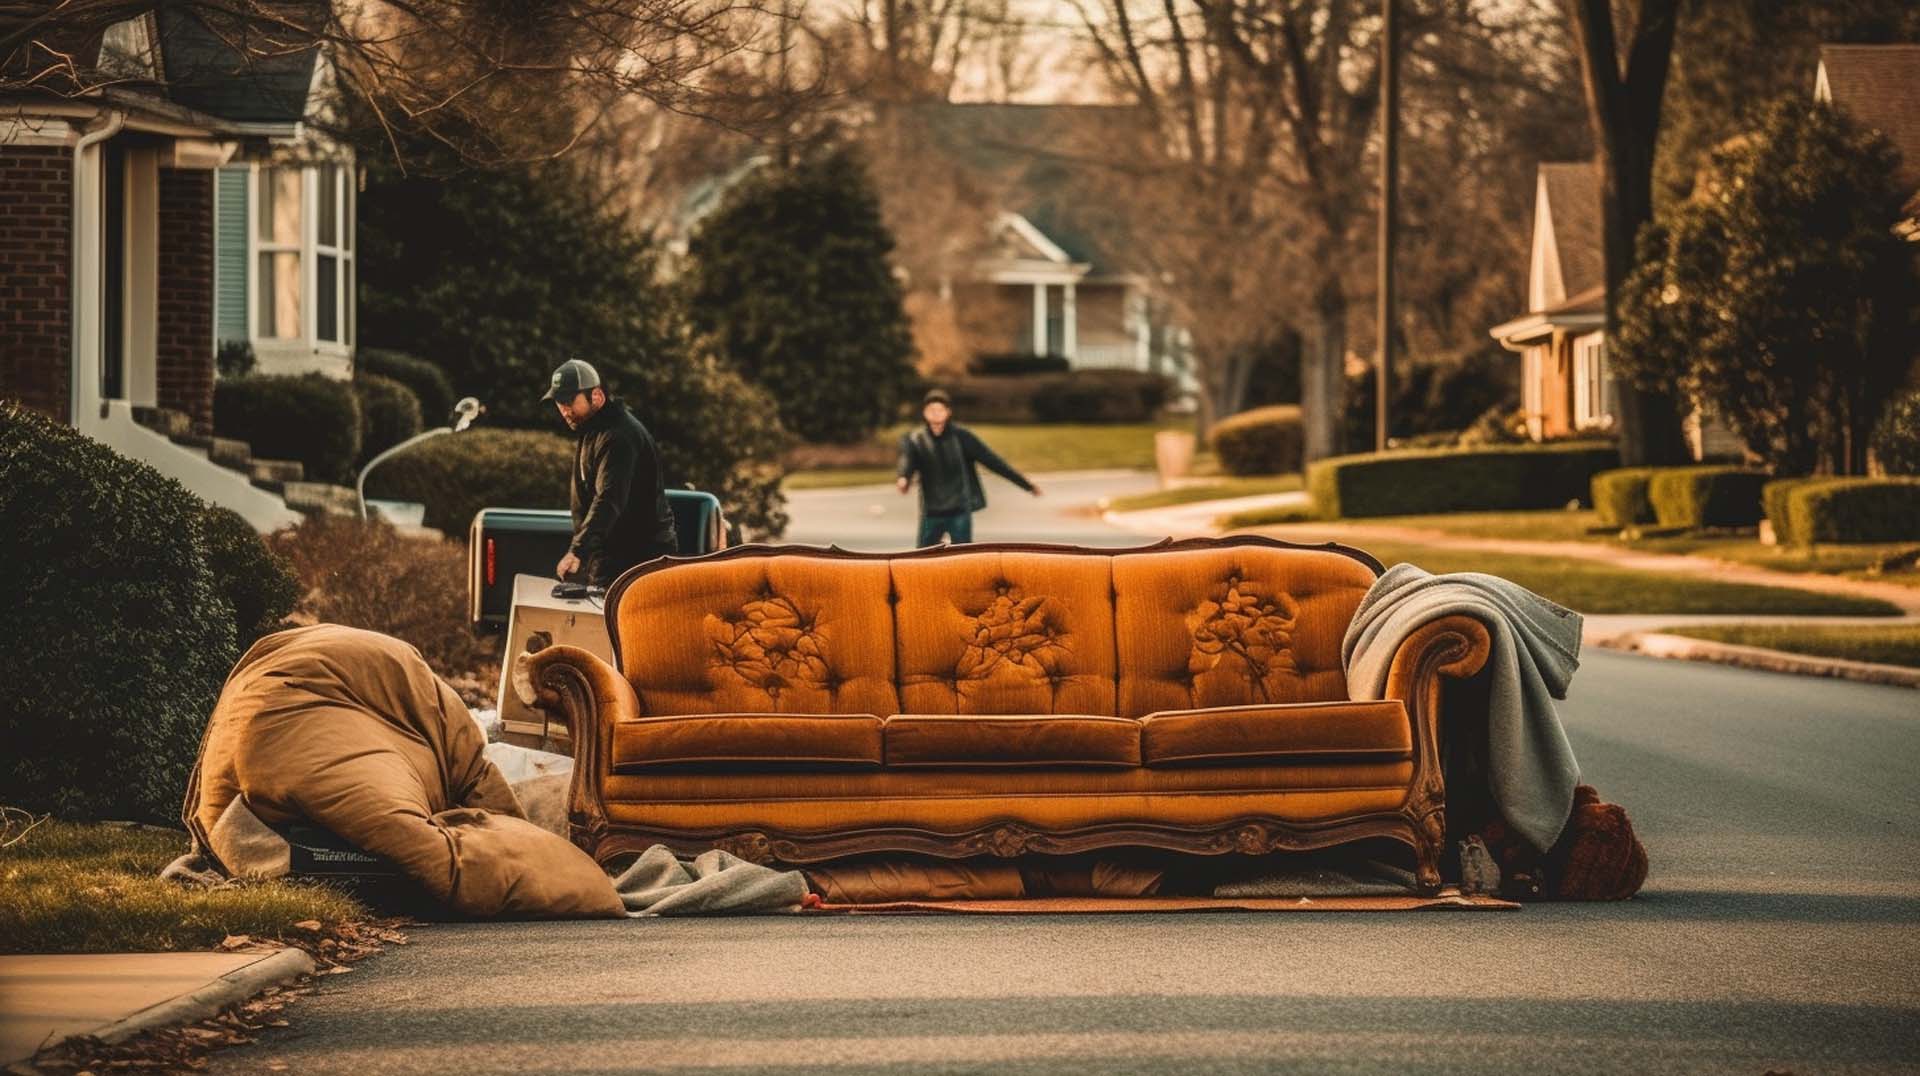 Residential Junk Removal Services in Sherbrooke